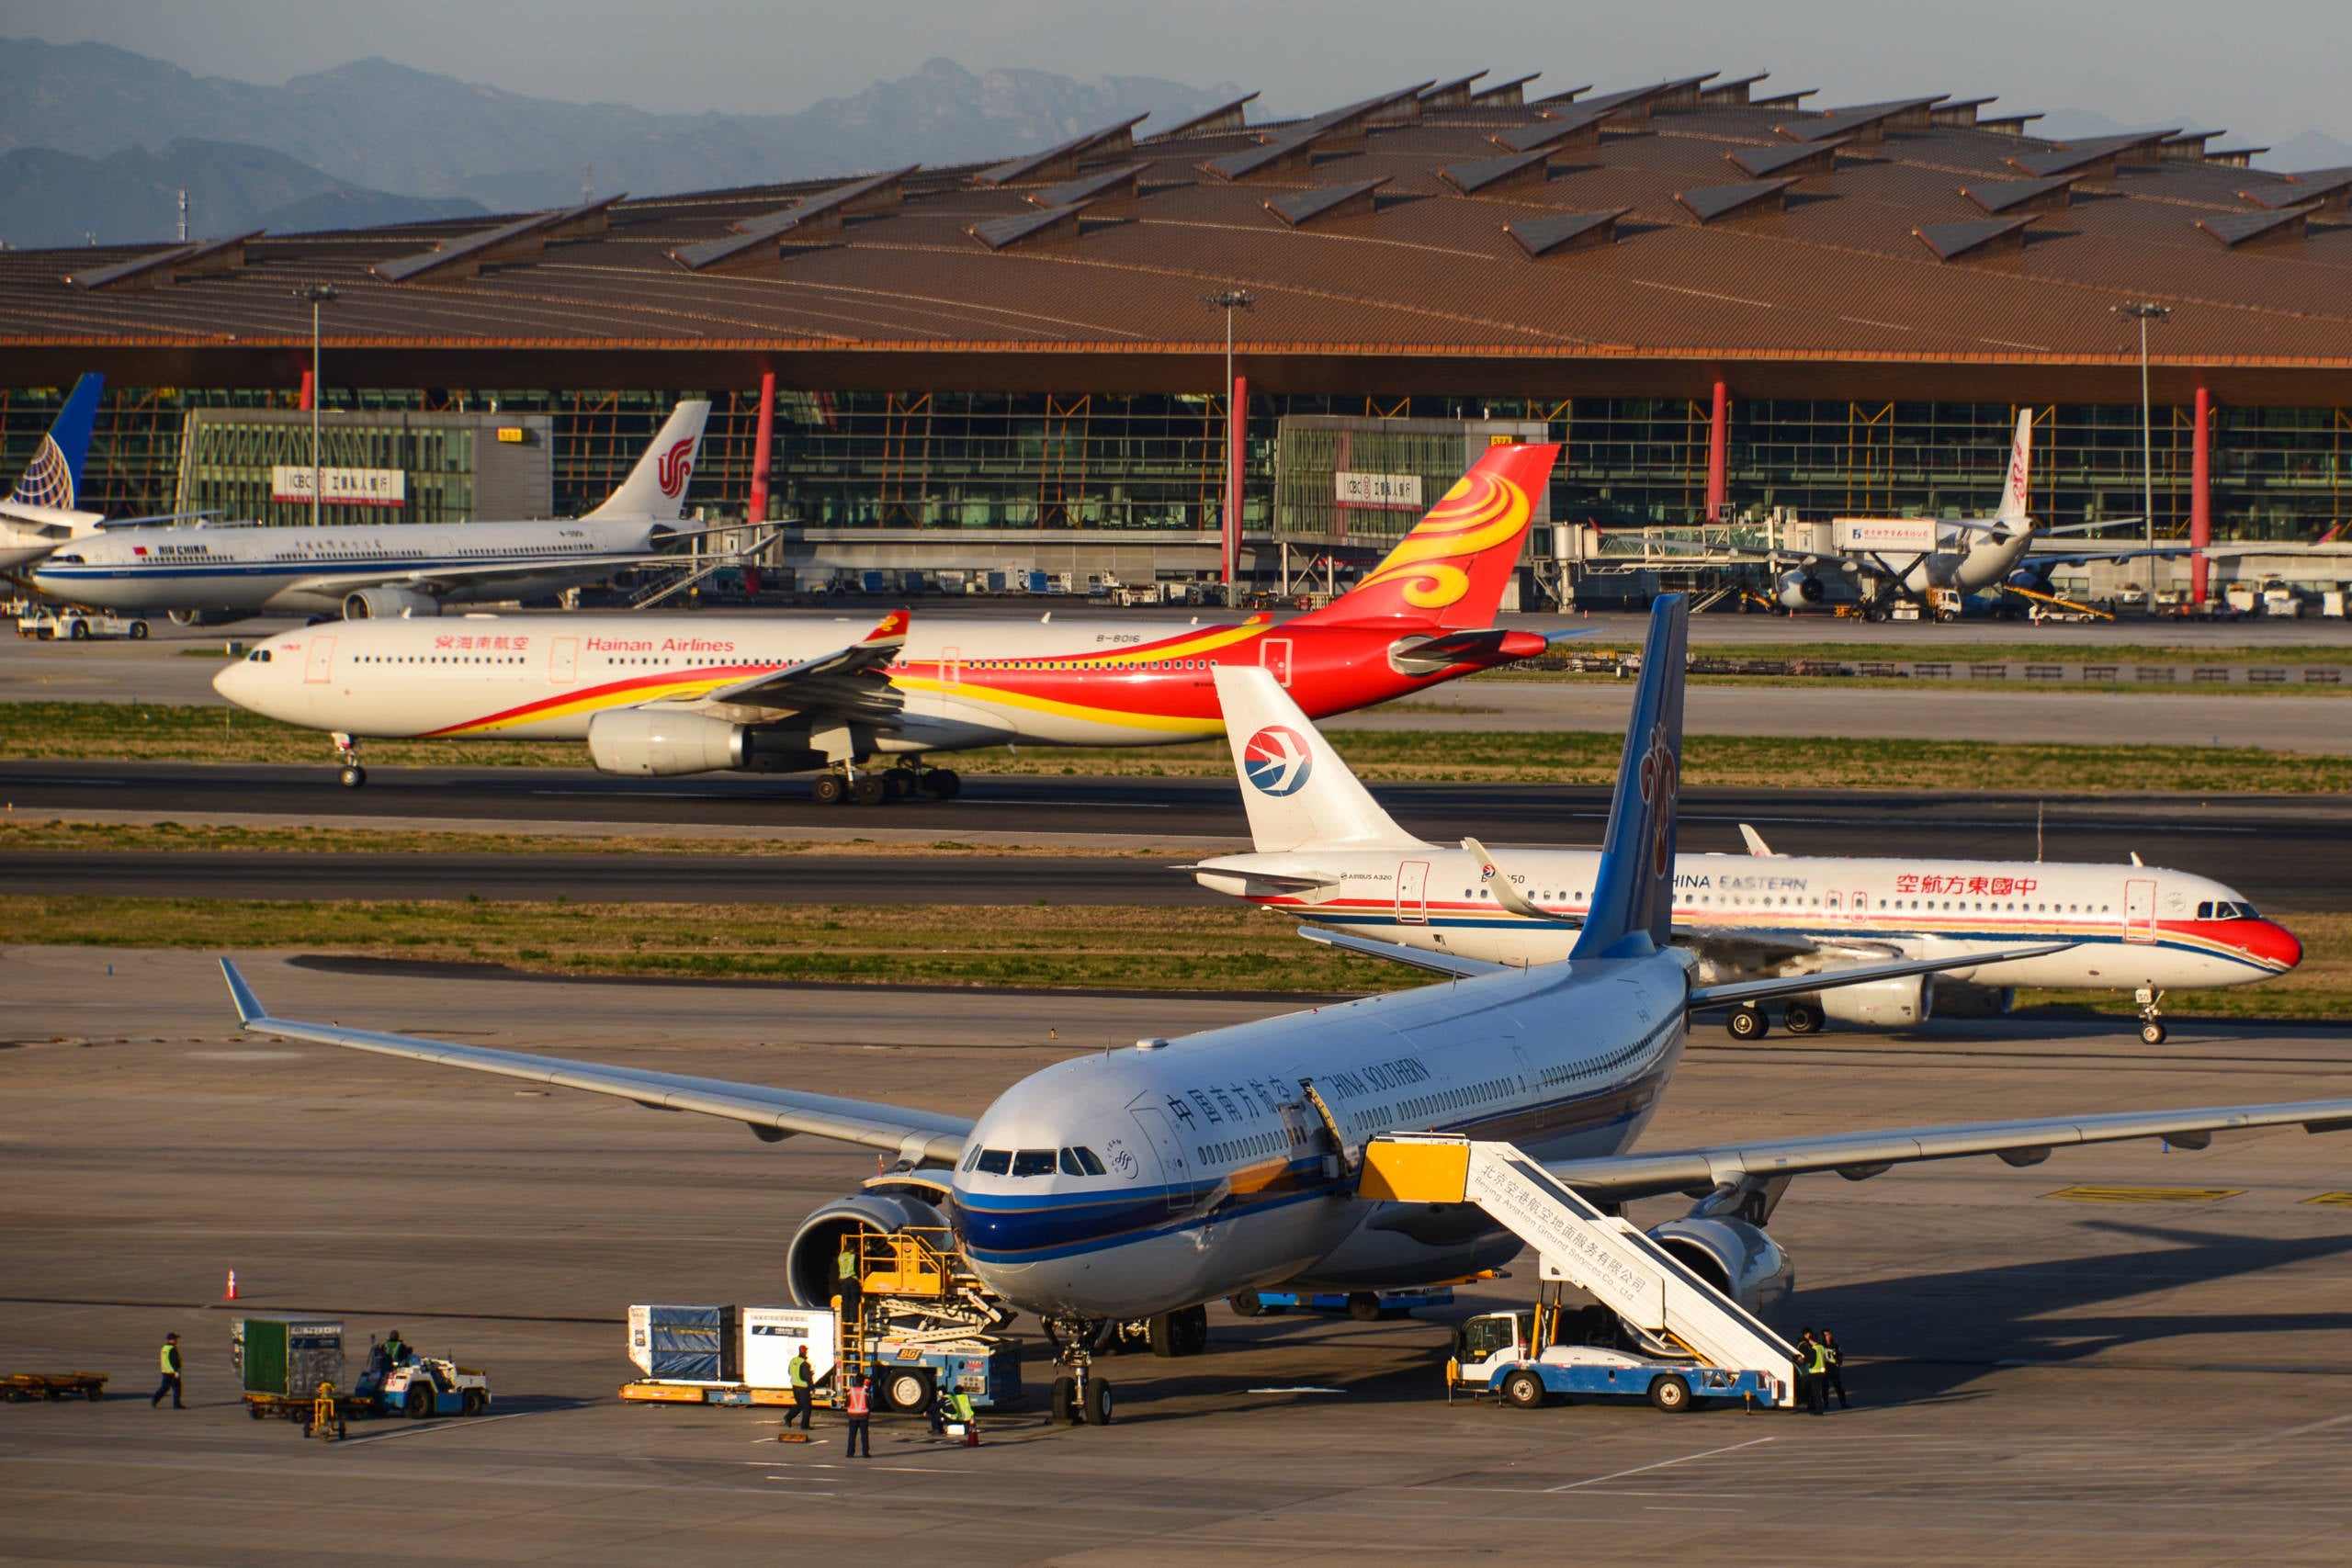 Planes At Airport In Beijing